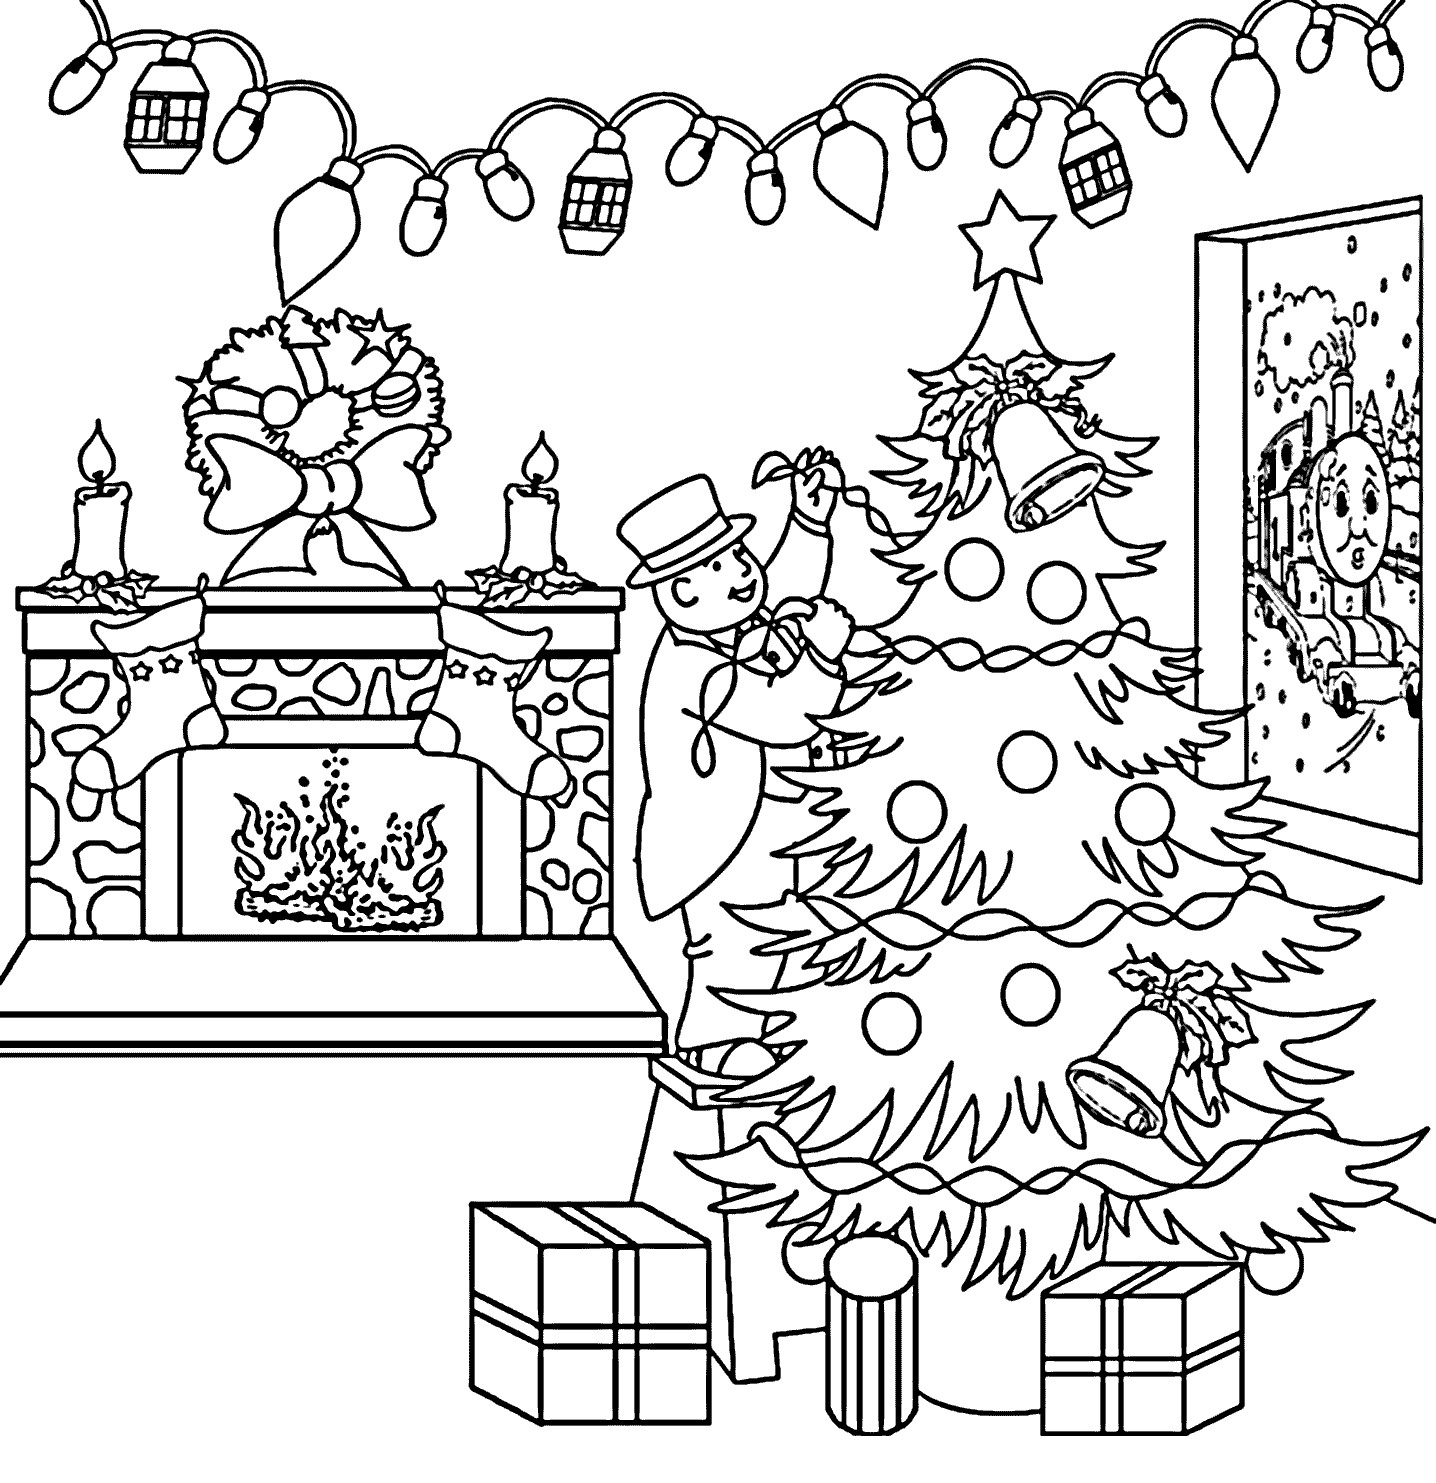 Christmas Printable Coloring Sheets
 Christmas Coloring Pages For Adults To Print Free